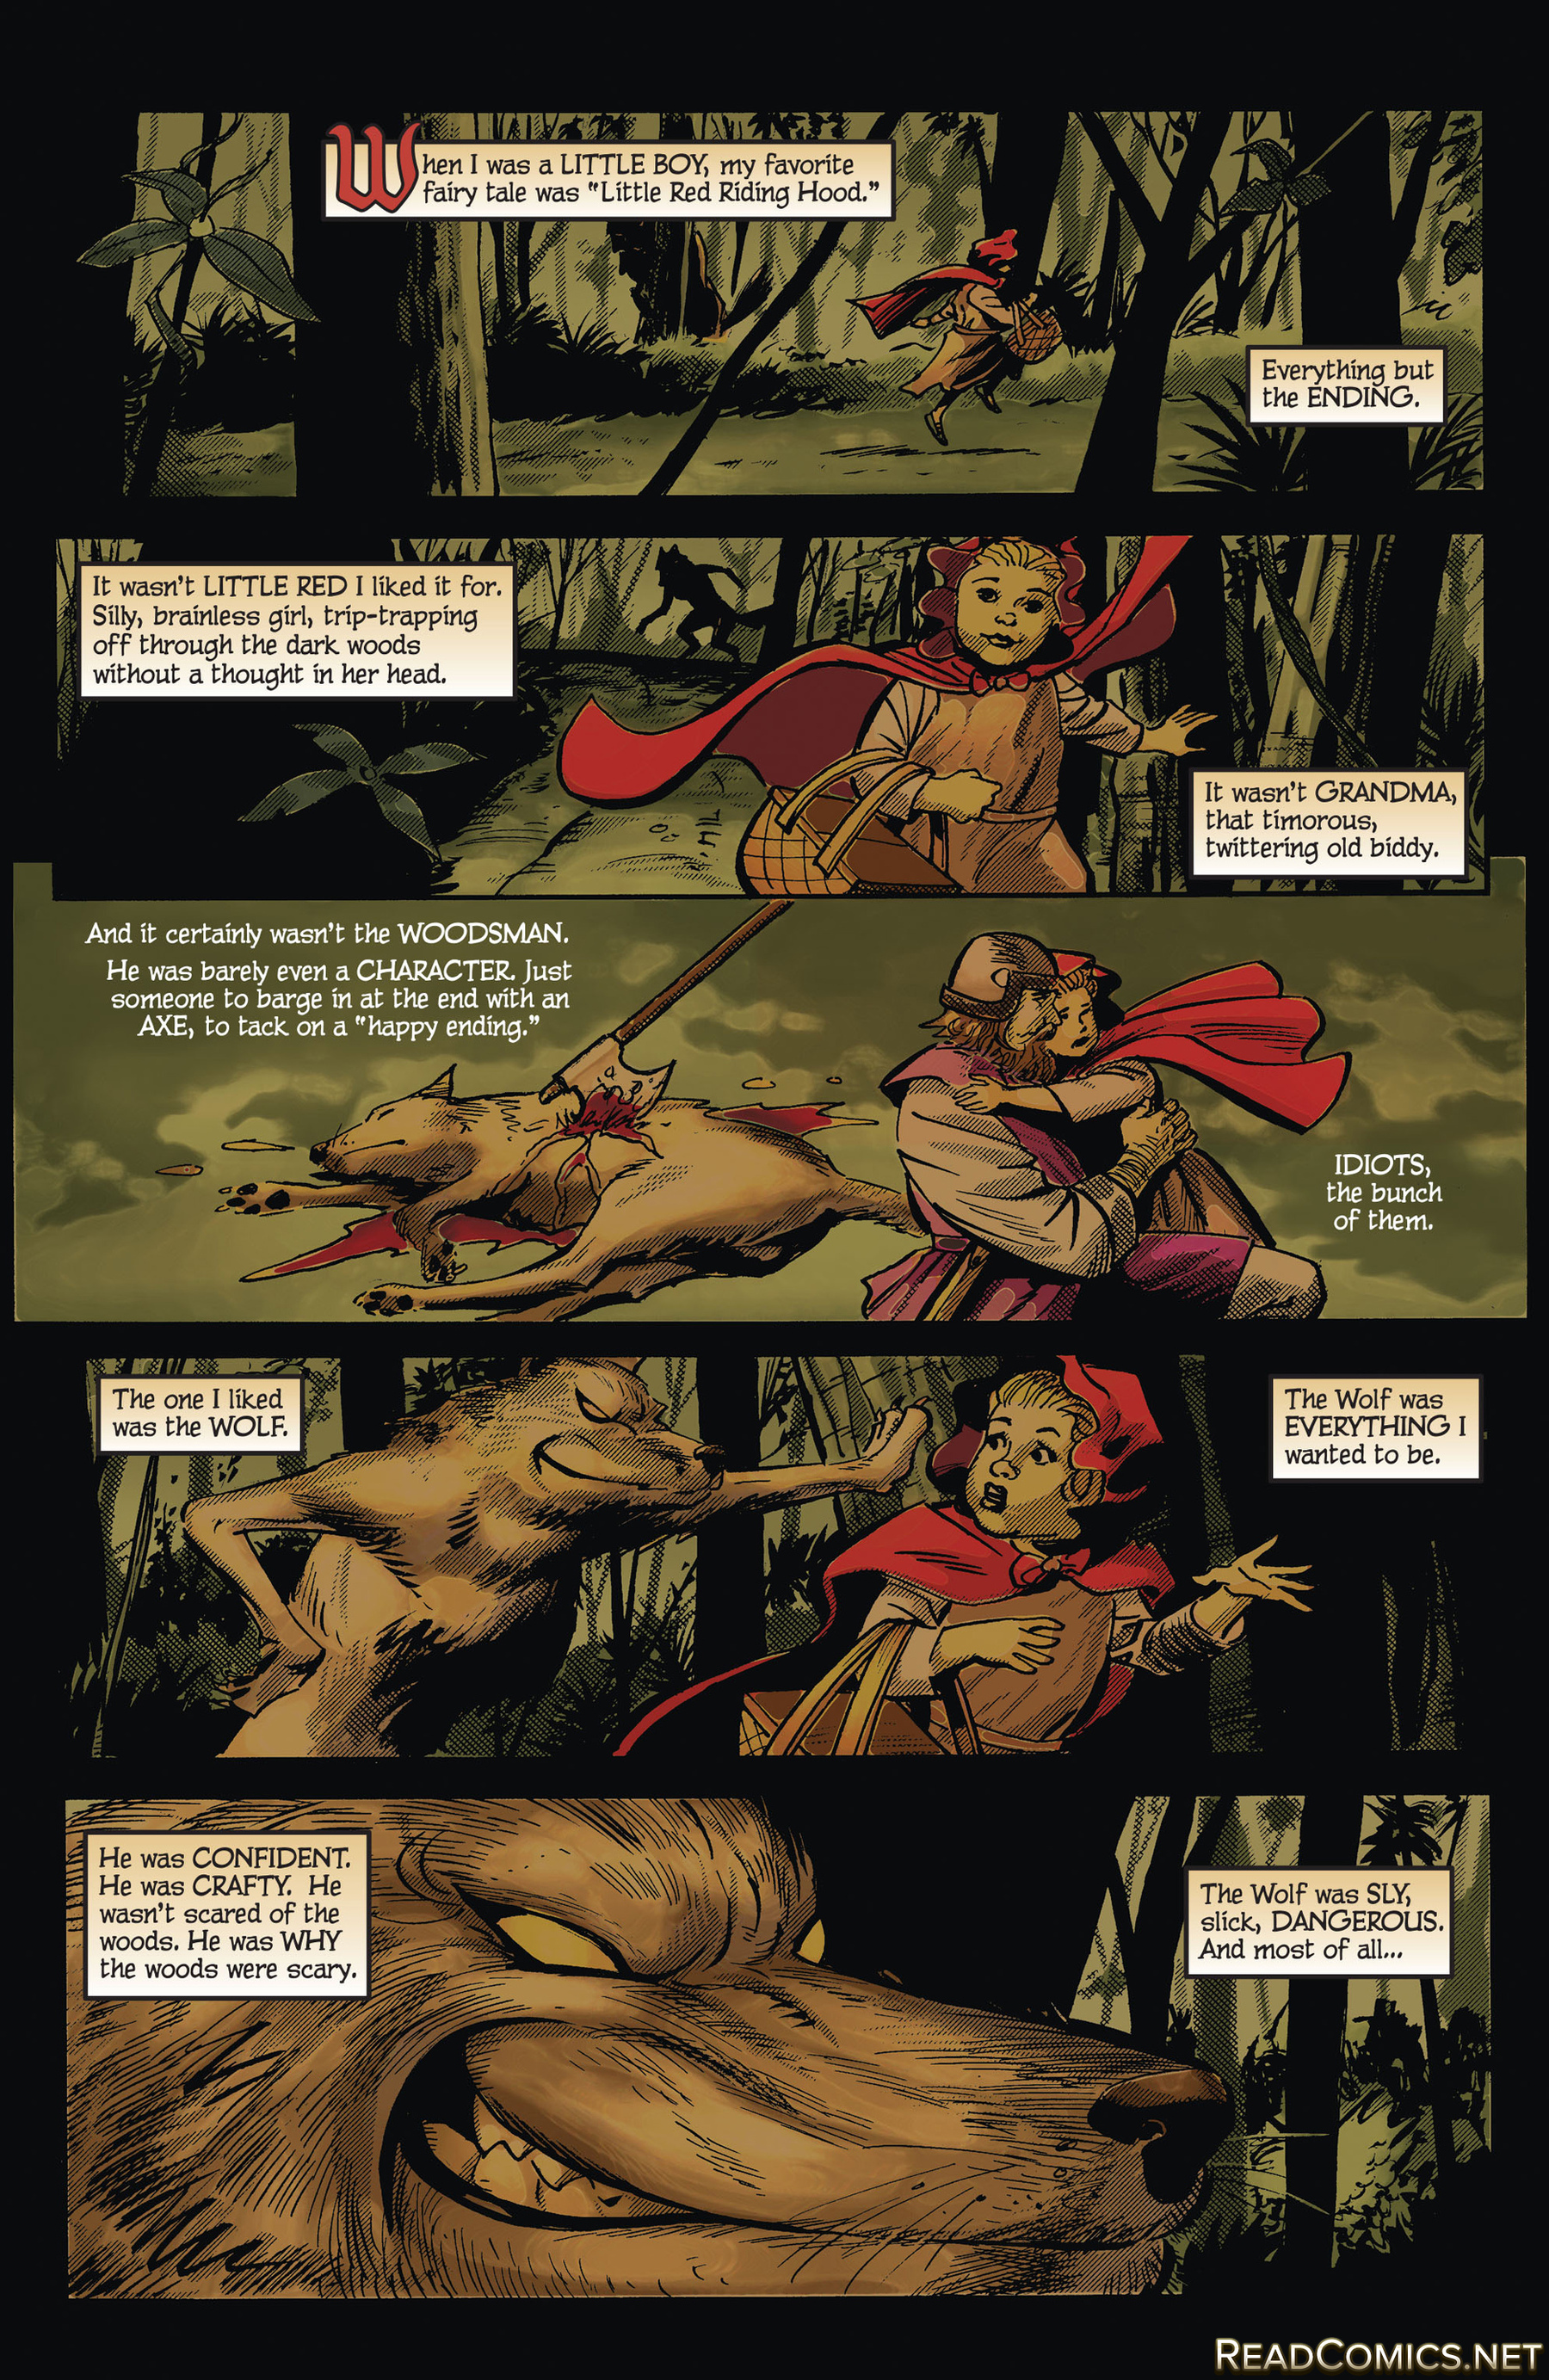 Astro City (2013-): Chapter 12 - Page 2